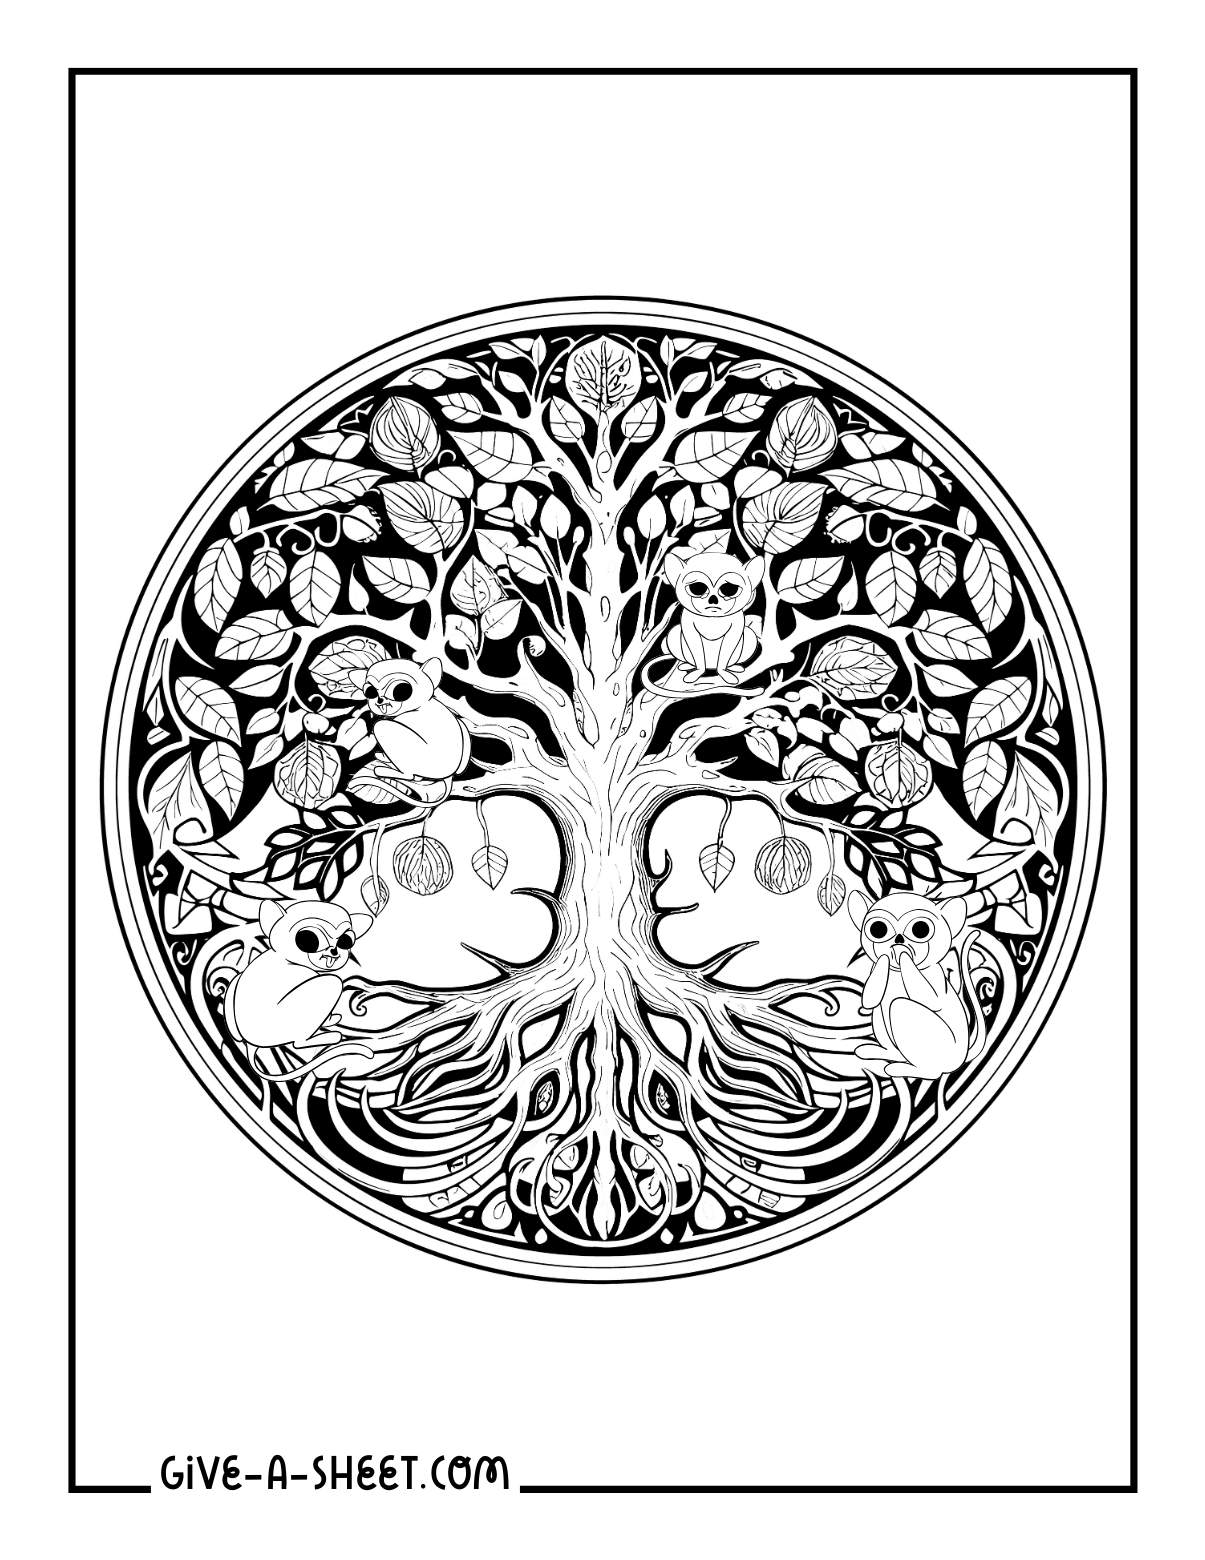 Simple tree coloring pages with animals.